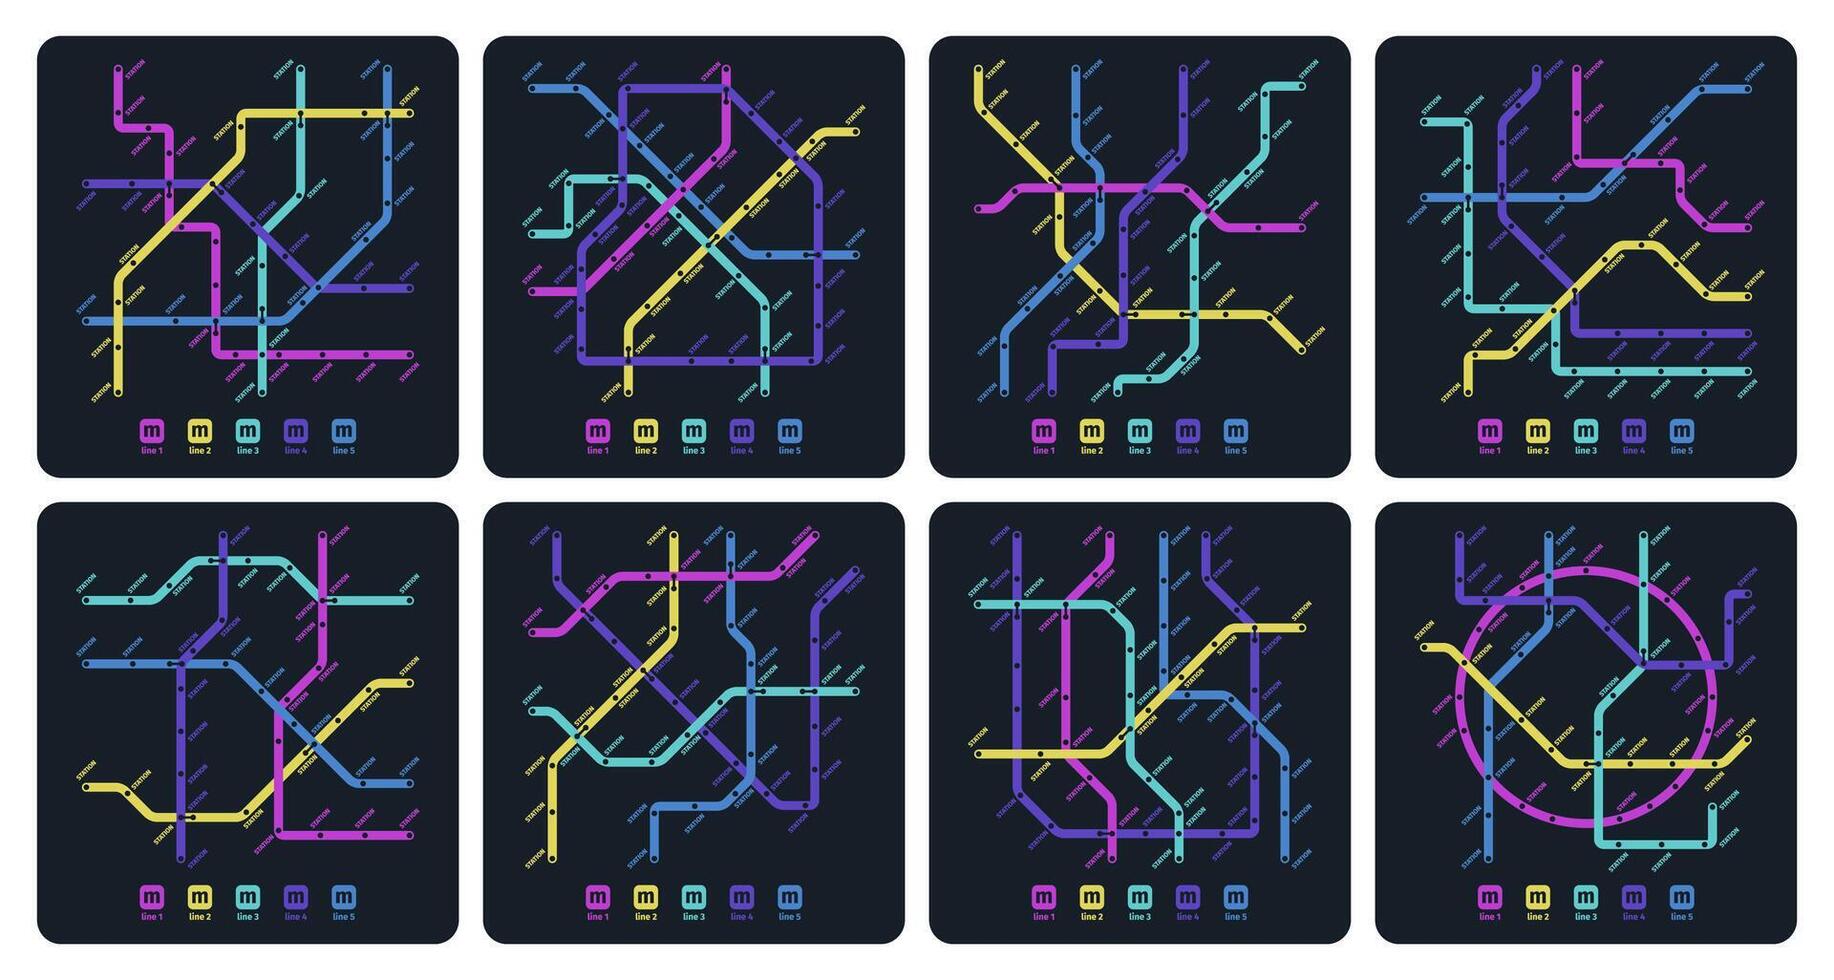 Subway dark map. Underground metro station subway map with route direction and number of trains. Vector subway underground station map